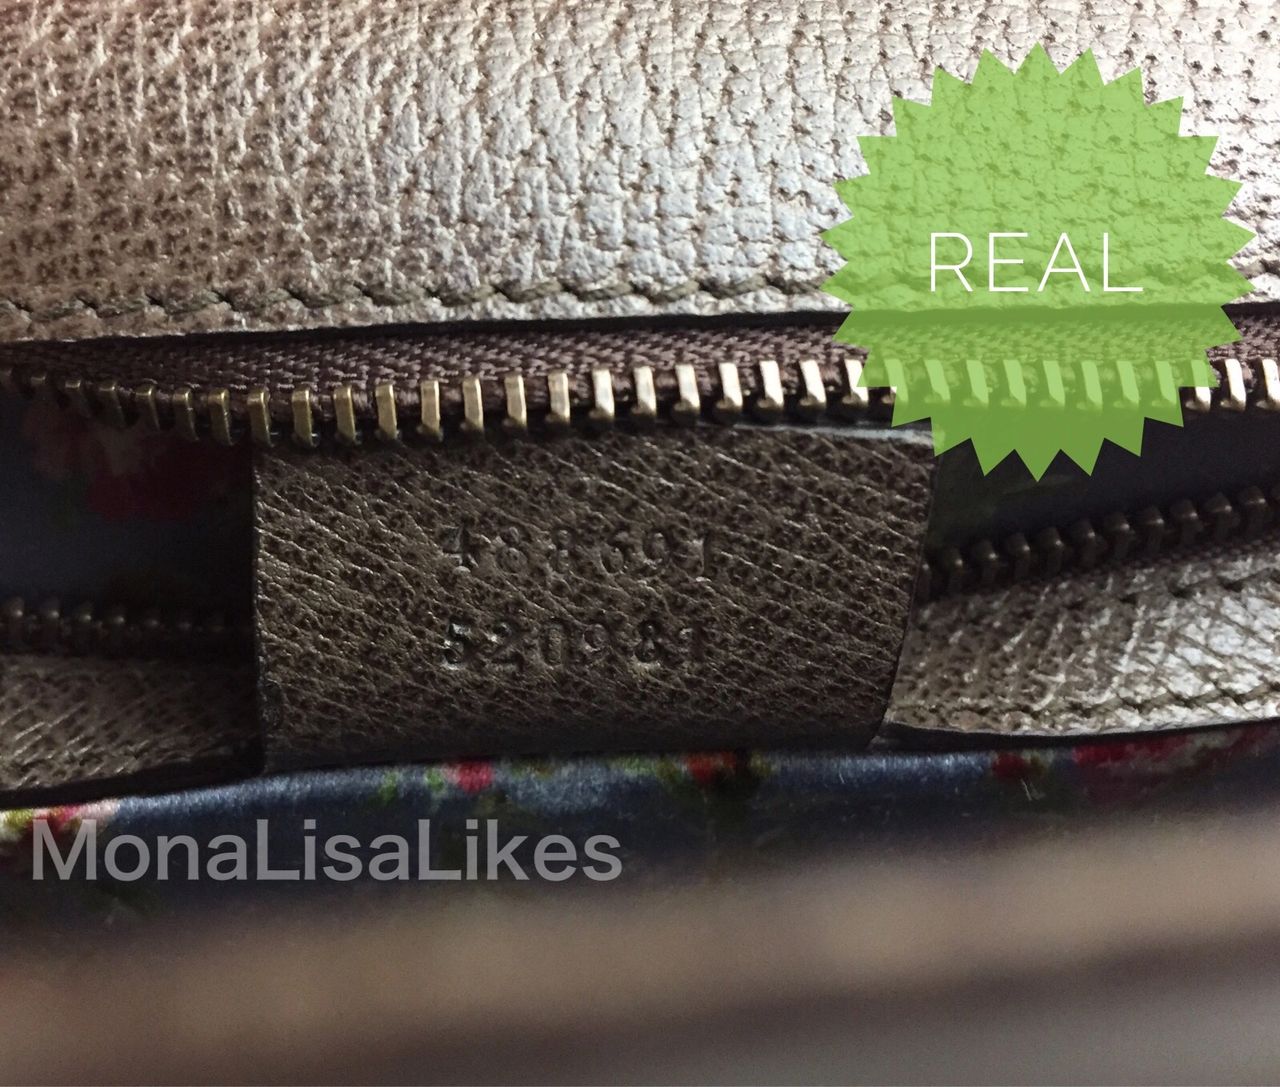 Authenticity Guide: Spot Fake or Real Gucci